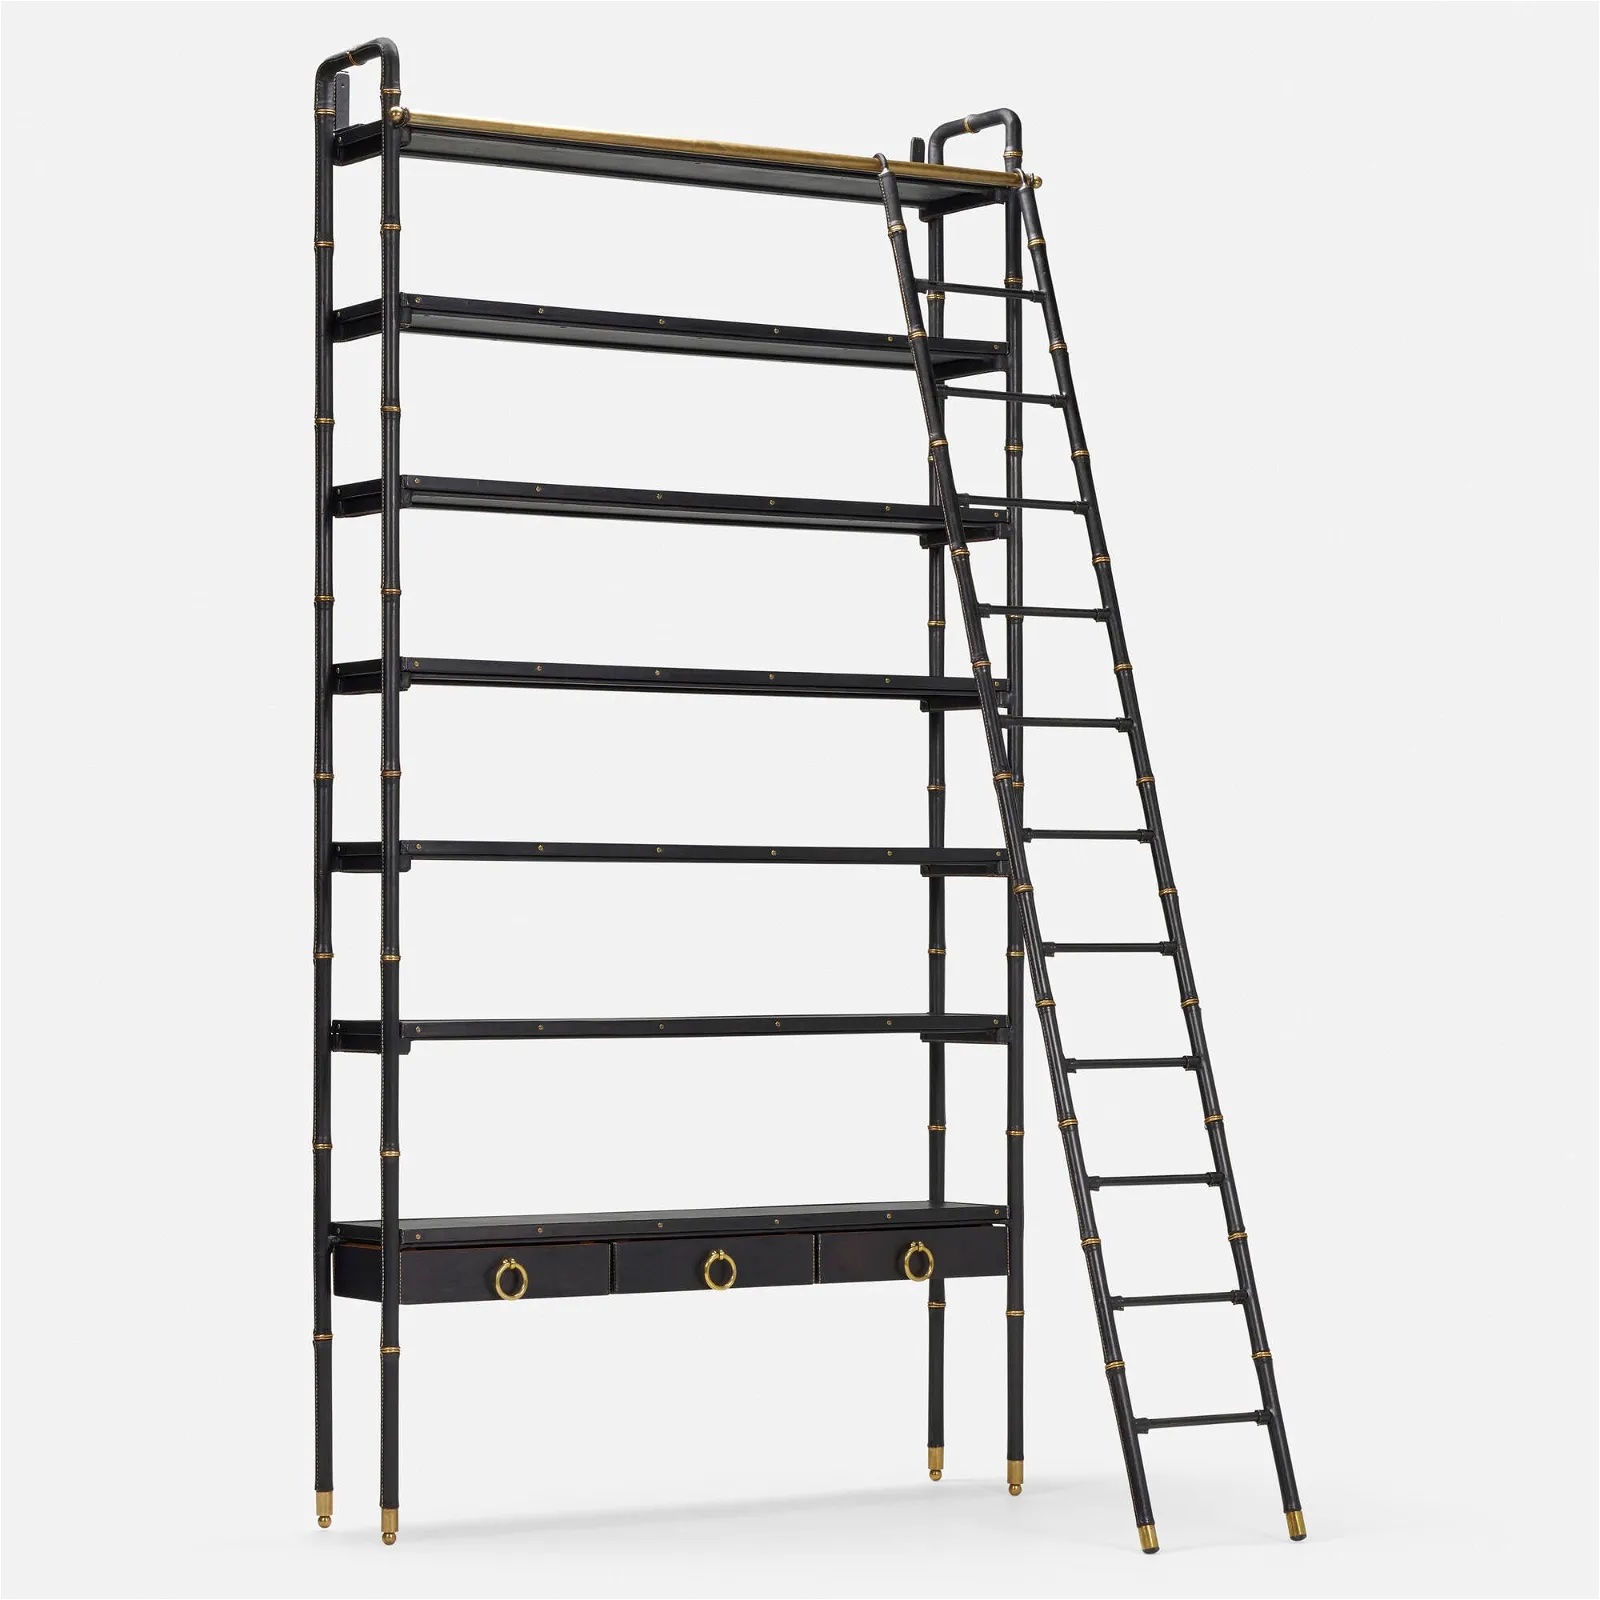 Bookshelf and ladder attributed to Jacques Adnet, which sold for $28,000 ($36,680 with buyer's premium) at LAMA.